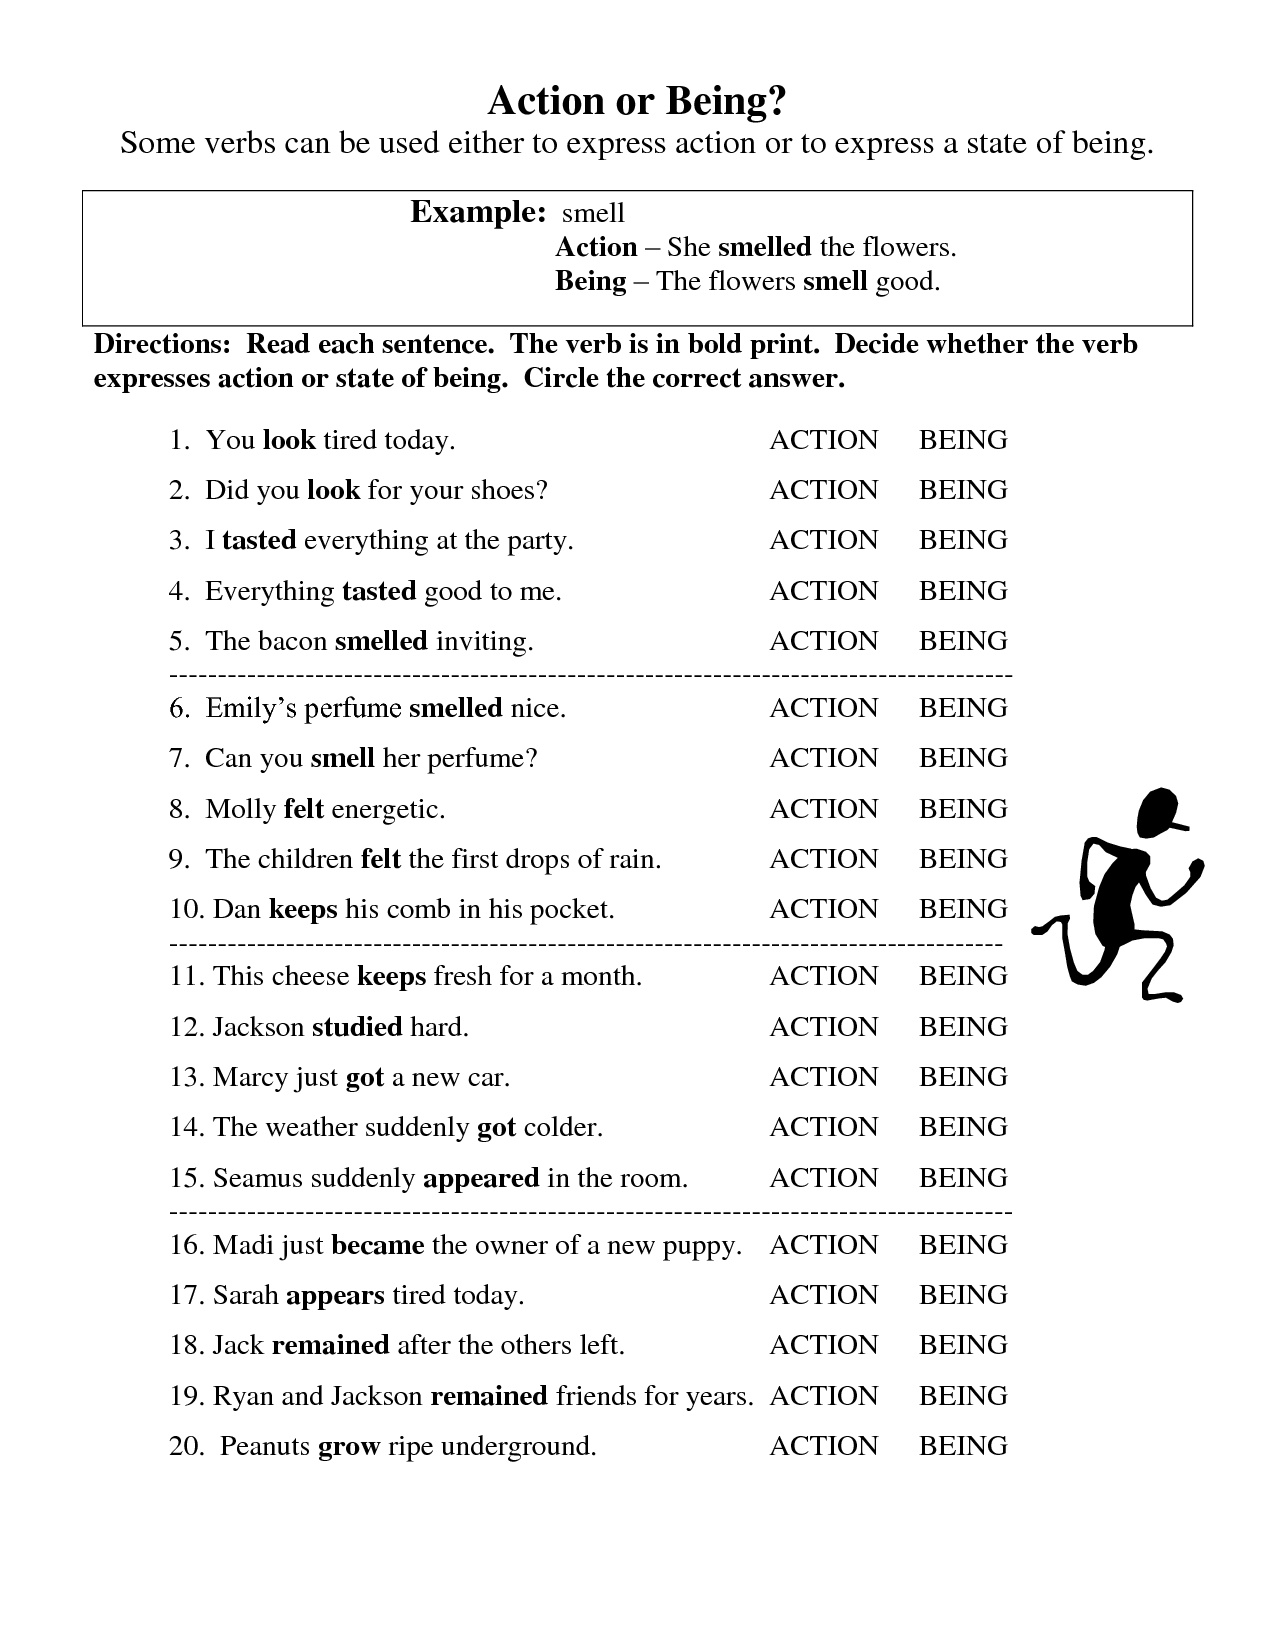 17-best-images-of-state-of-being-verbs-worksheet-action-linking-verb-worksheet-action-and